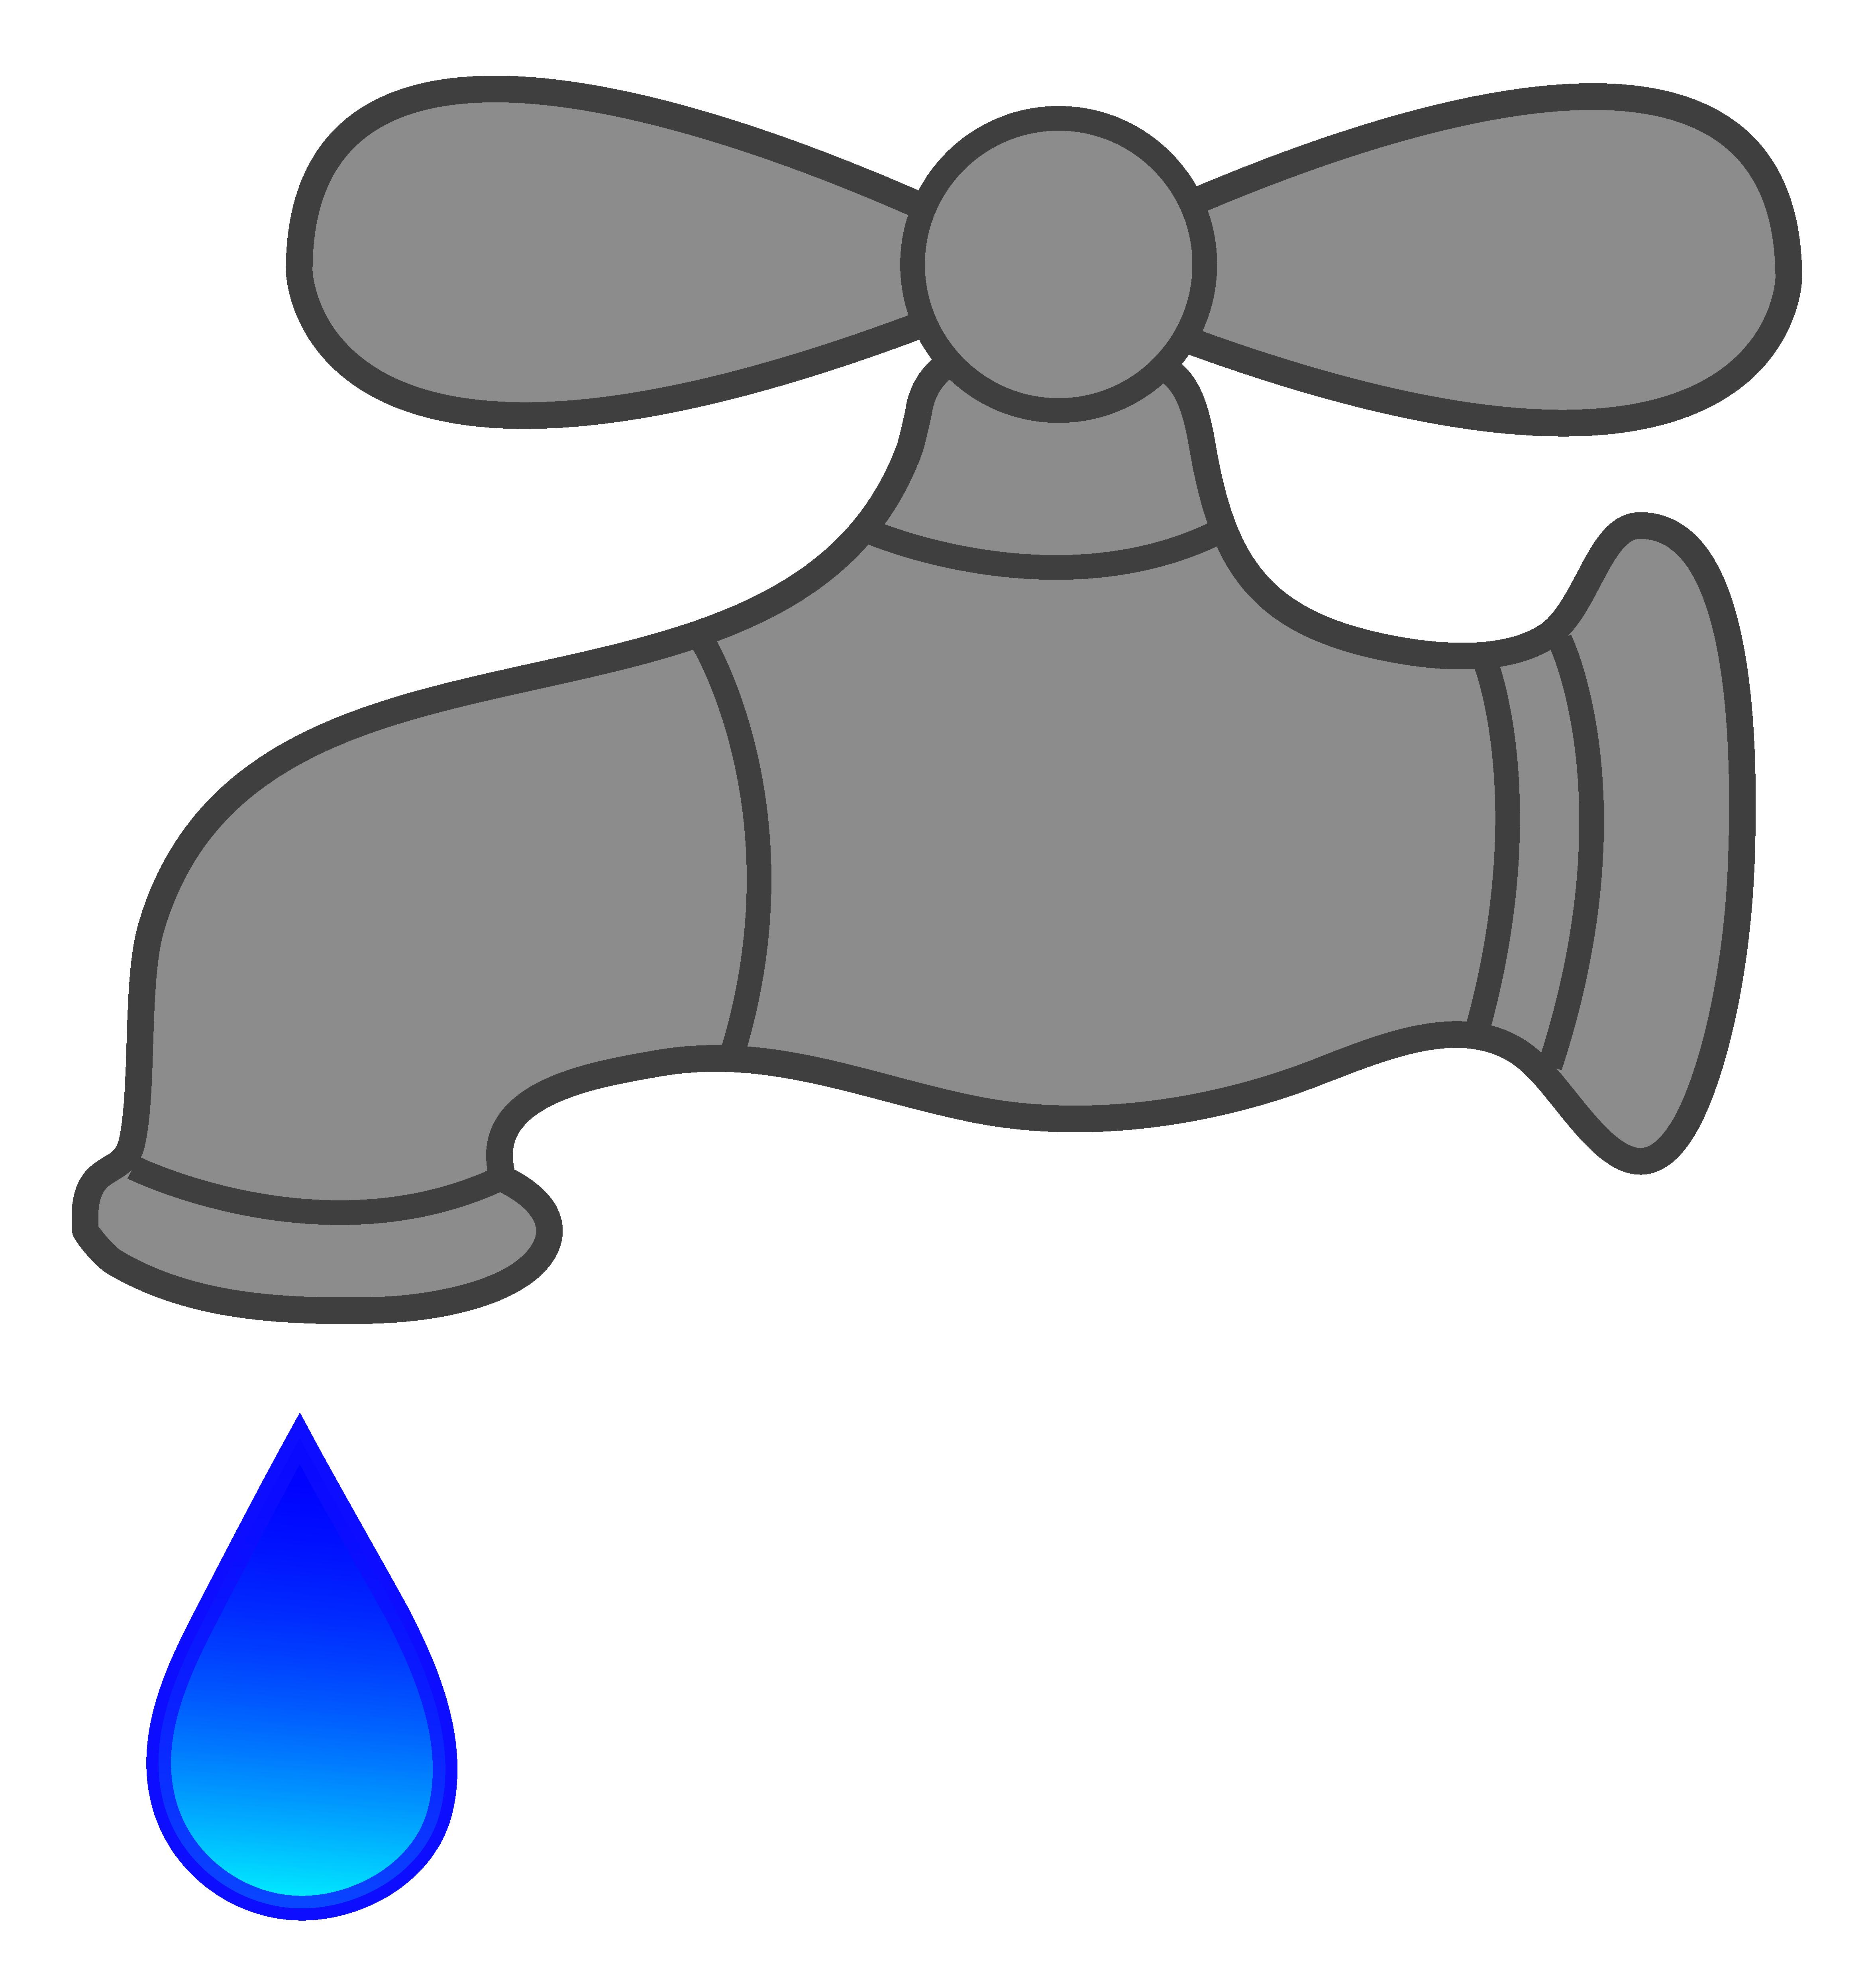 Water tap clipart - Clipground